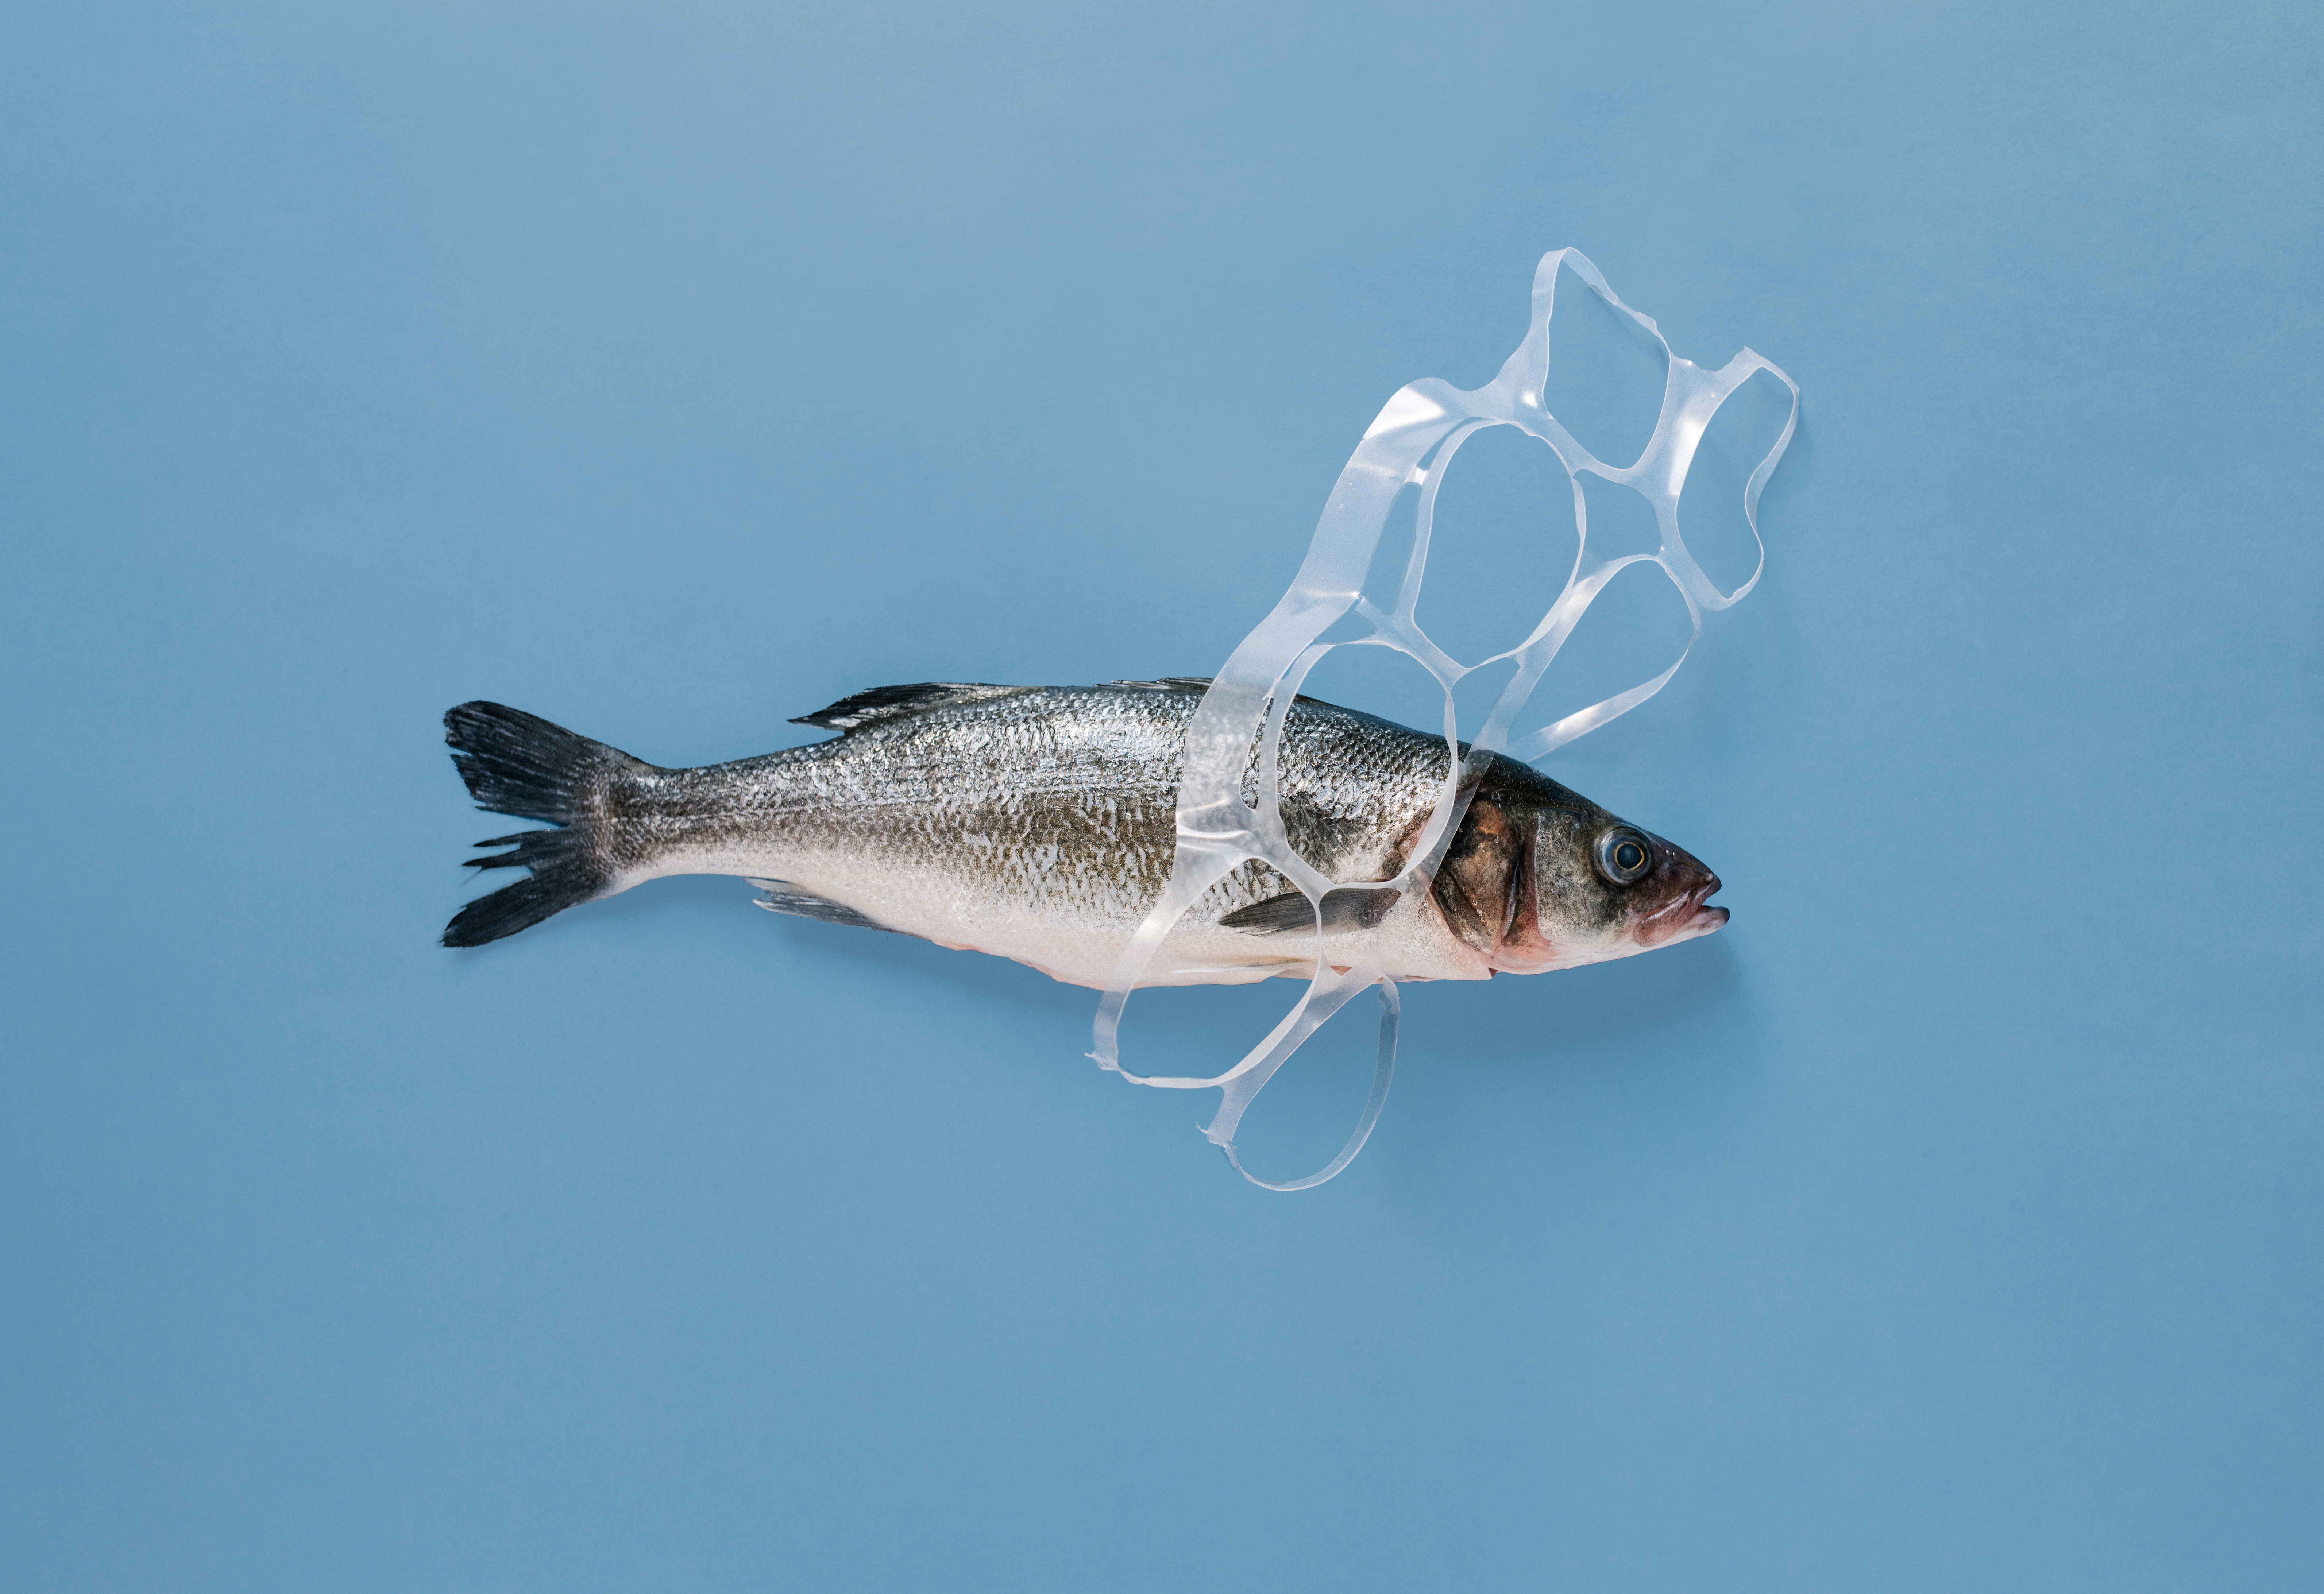 A fish stuck in a plastic can holder.